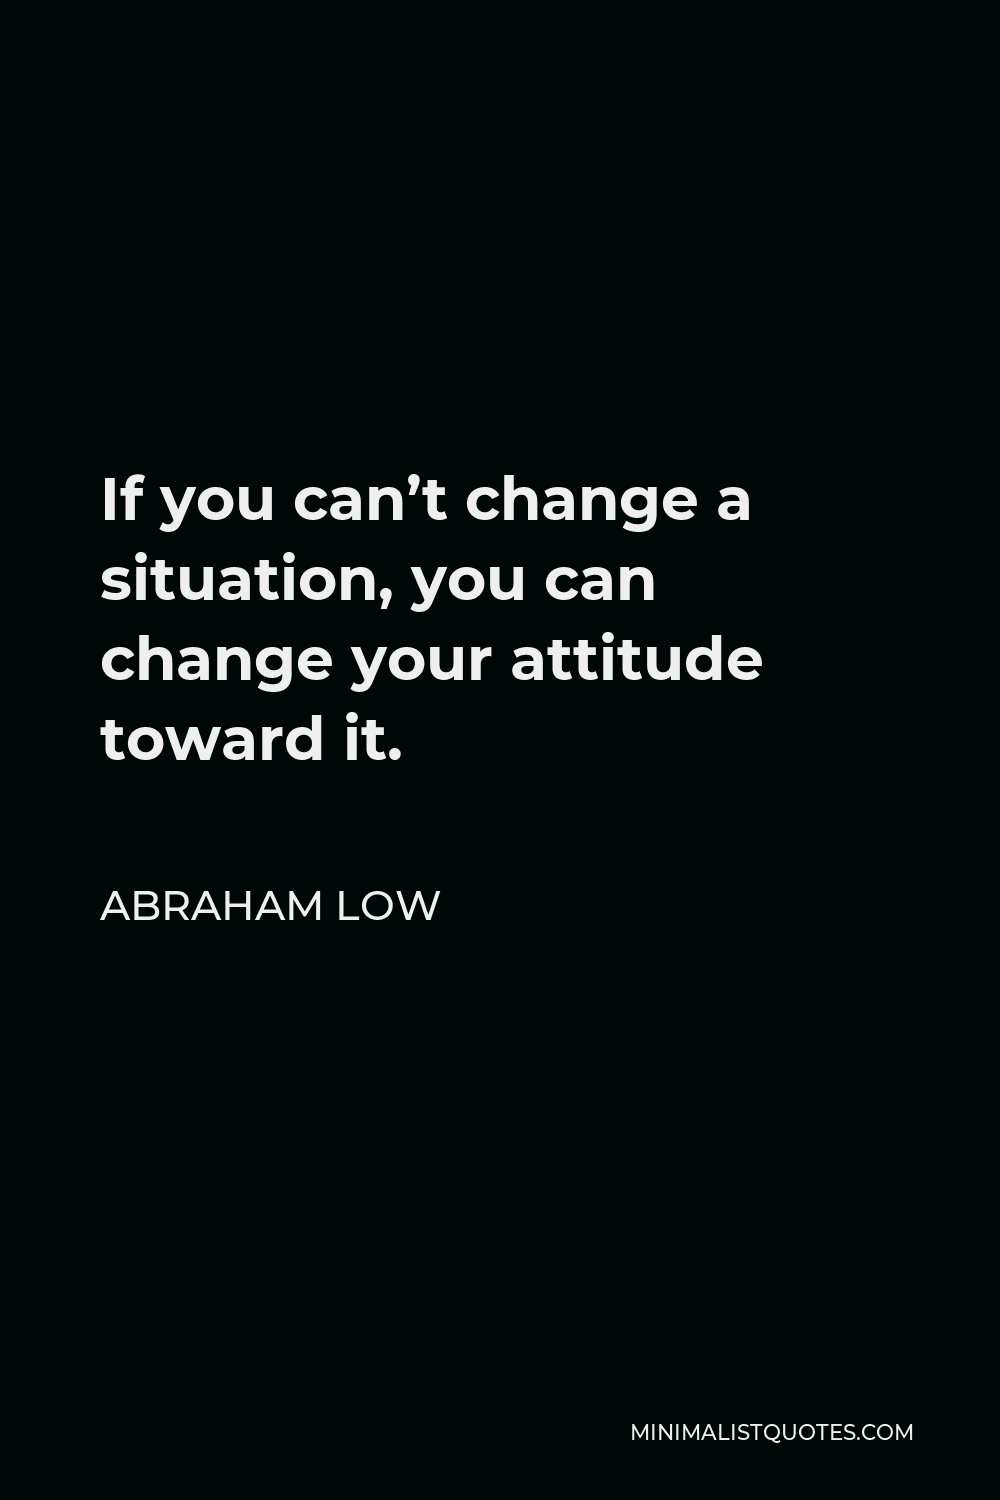 Abraham Low Quote - If you can’t change a situation, you can change your attitude toward it.